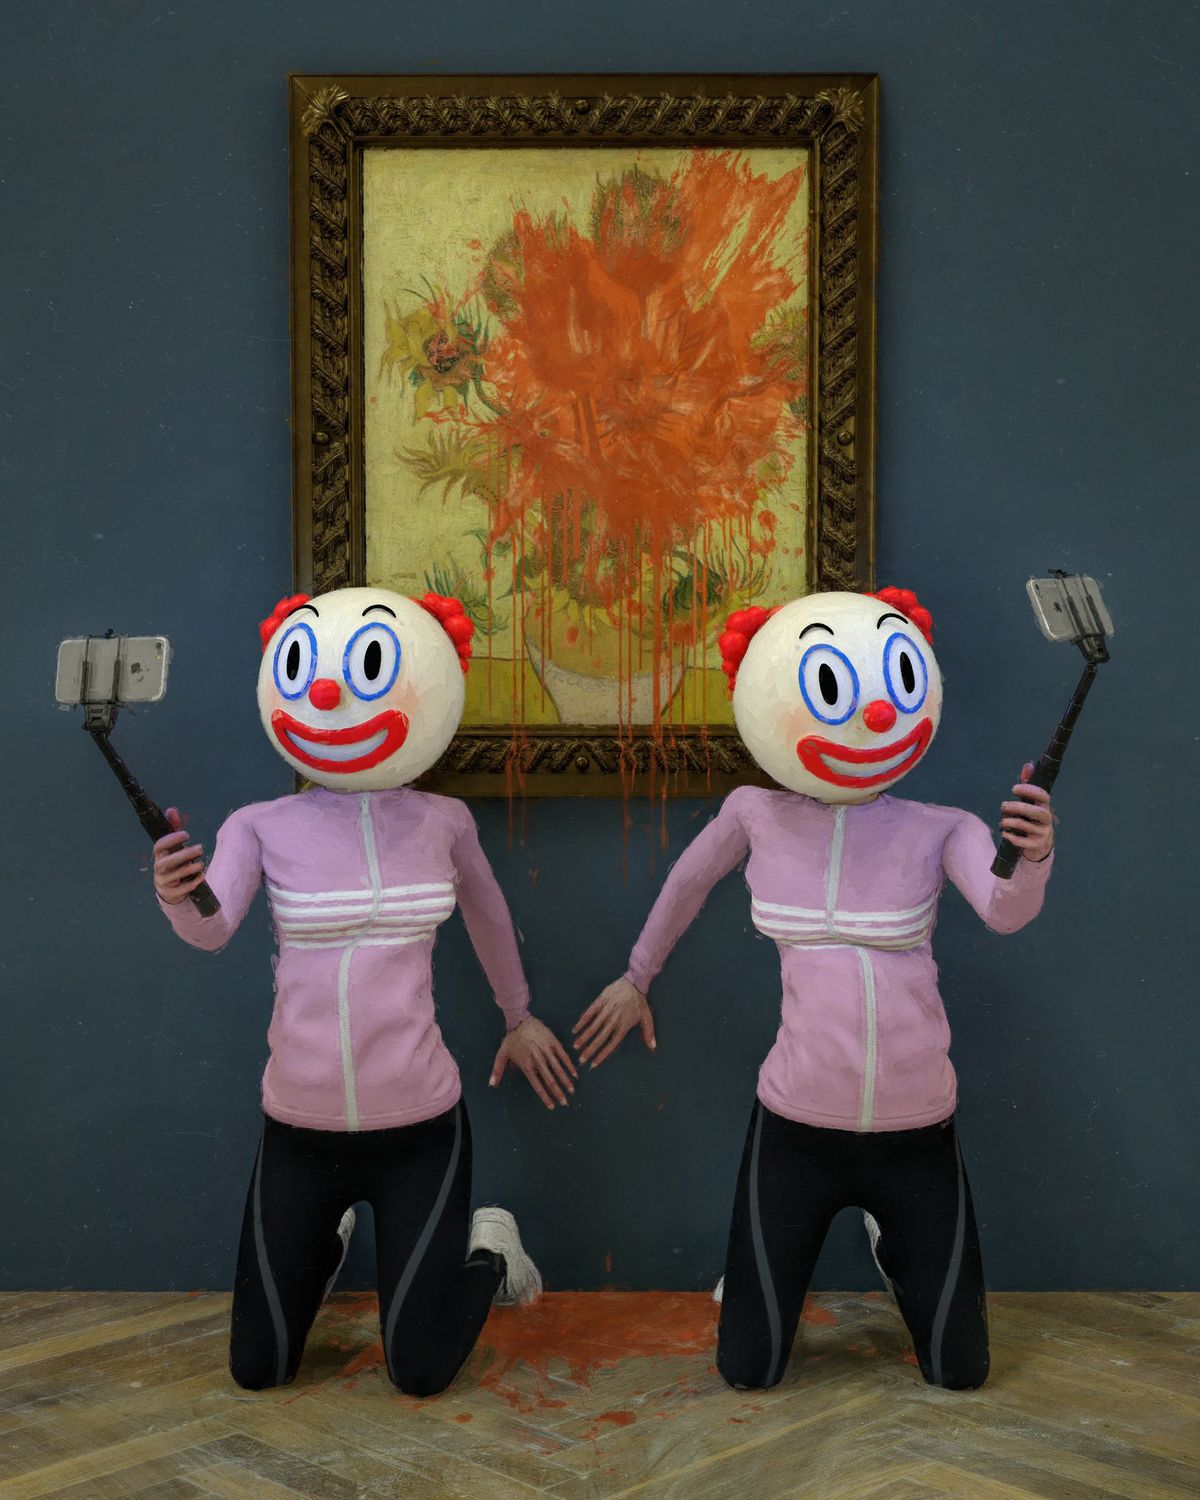 Clowning around? NFT king Beeple posted a cryptic pic of the Just Stop Oil activists

@beeple via Twitter